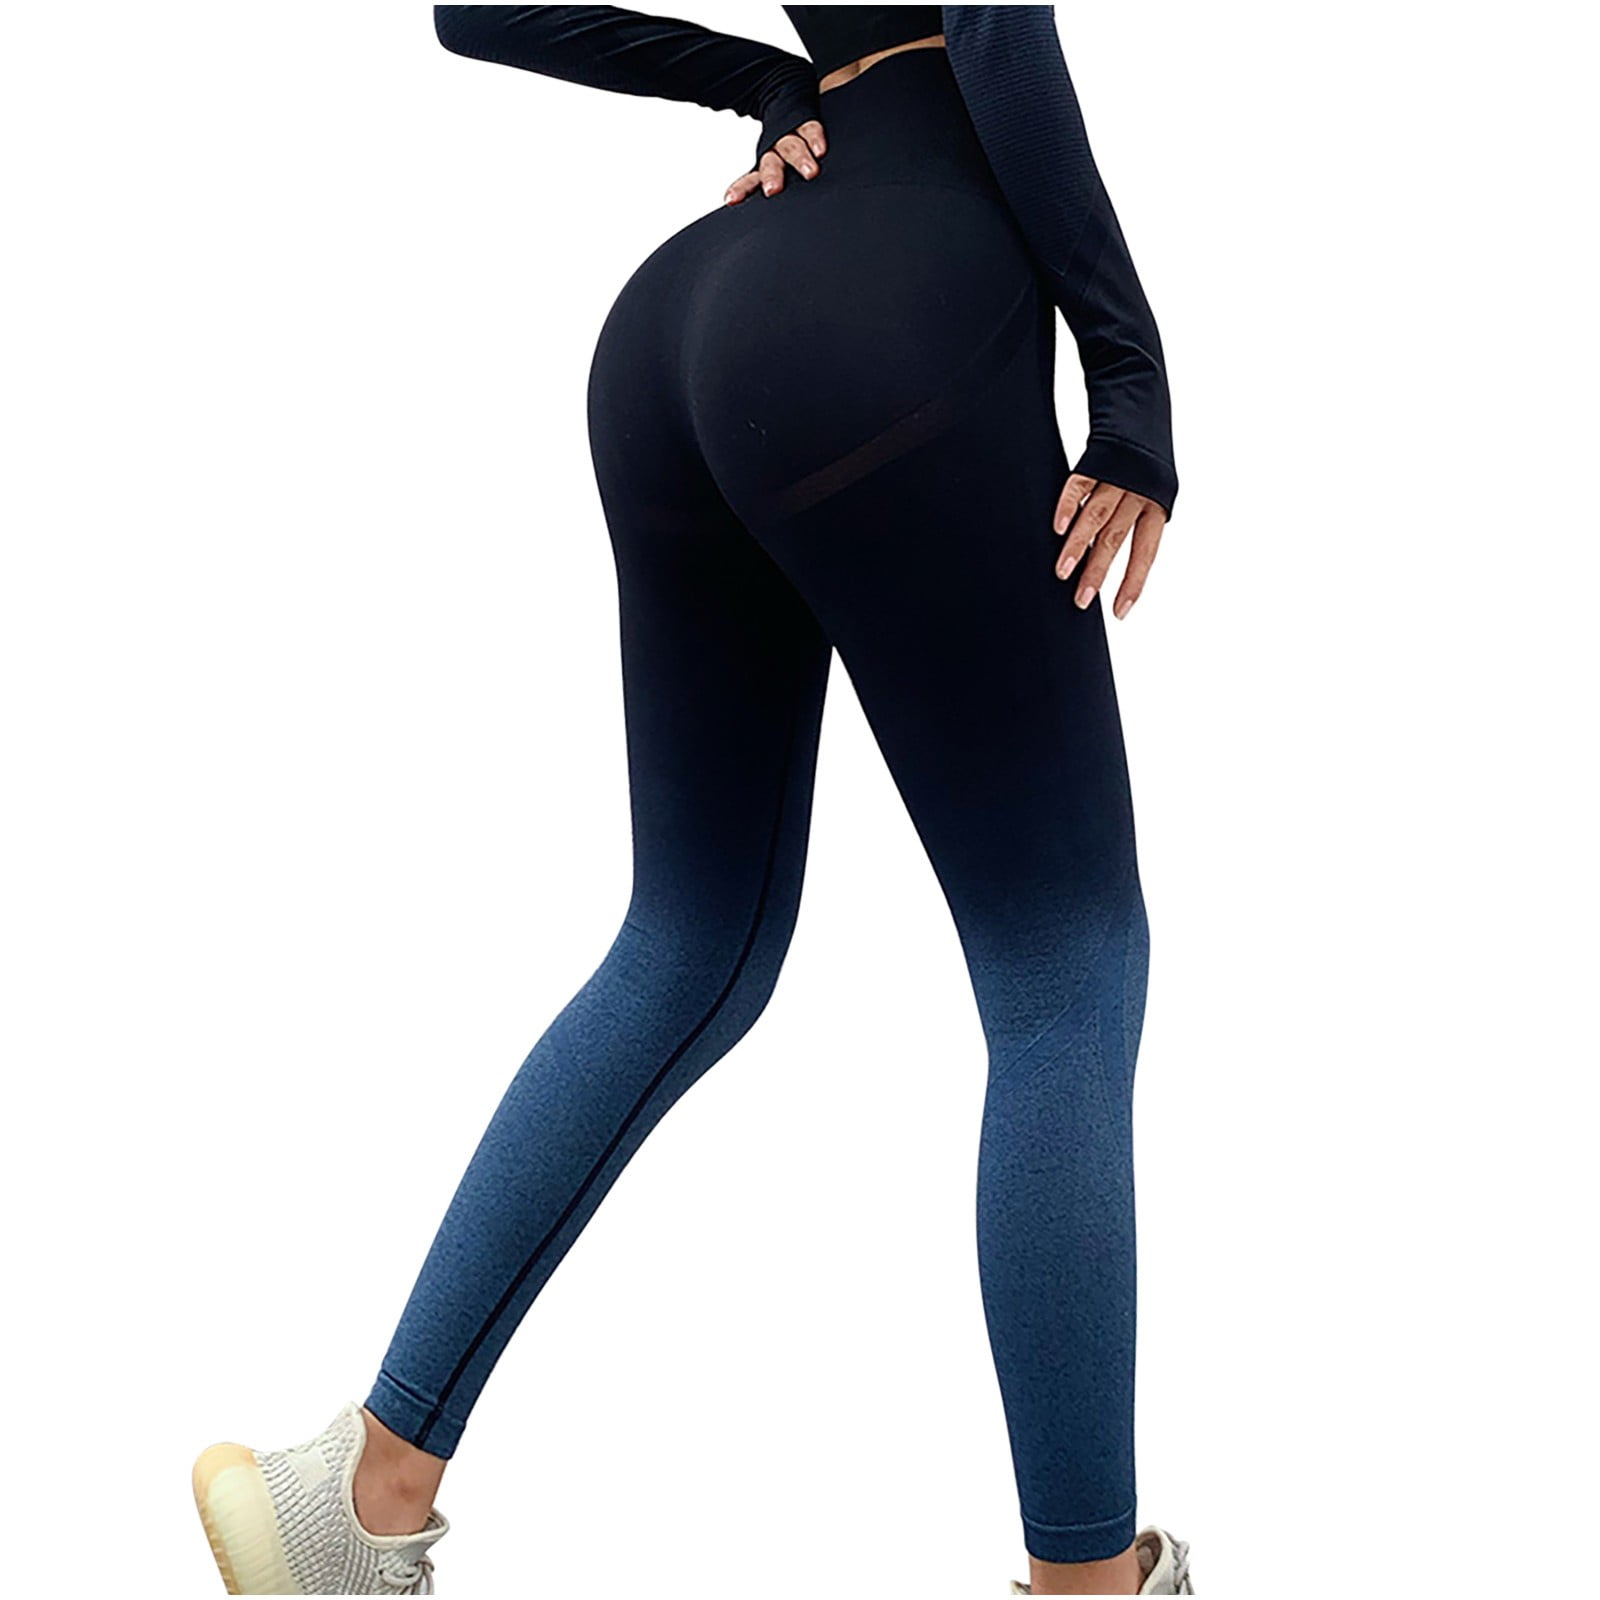 Ladies USA Pro High Waisted Yoga Seamless Ombre Leggings Sizes from 8 to 16